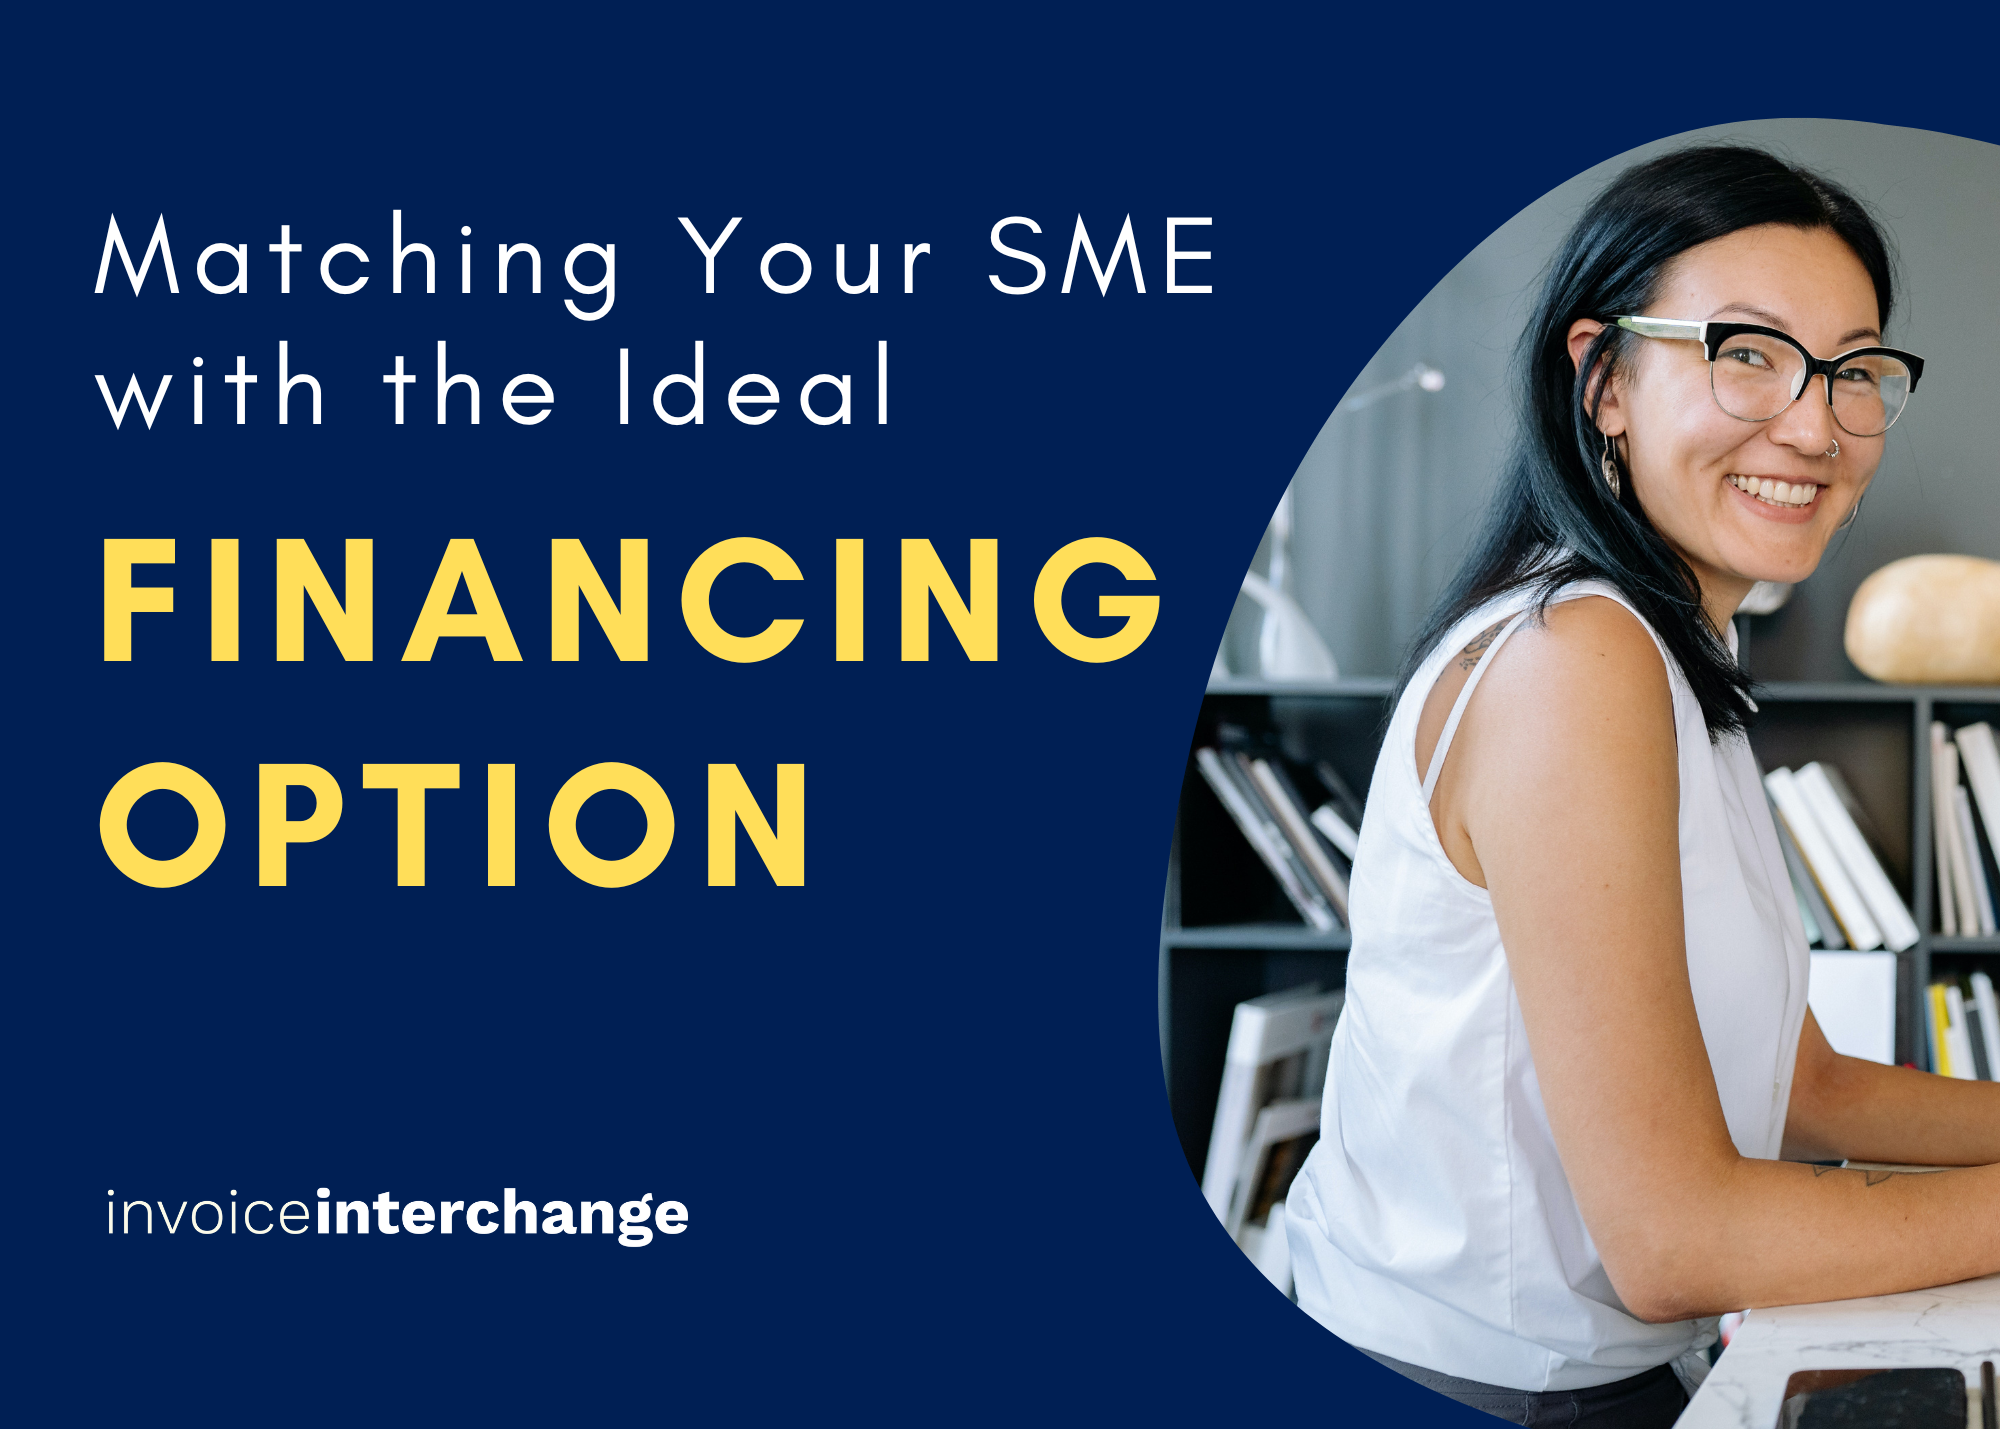 Finding the Right Fit: Matching Your SME with the Ideal Financing Option